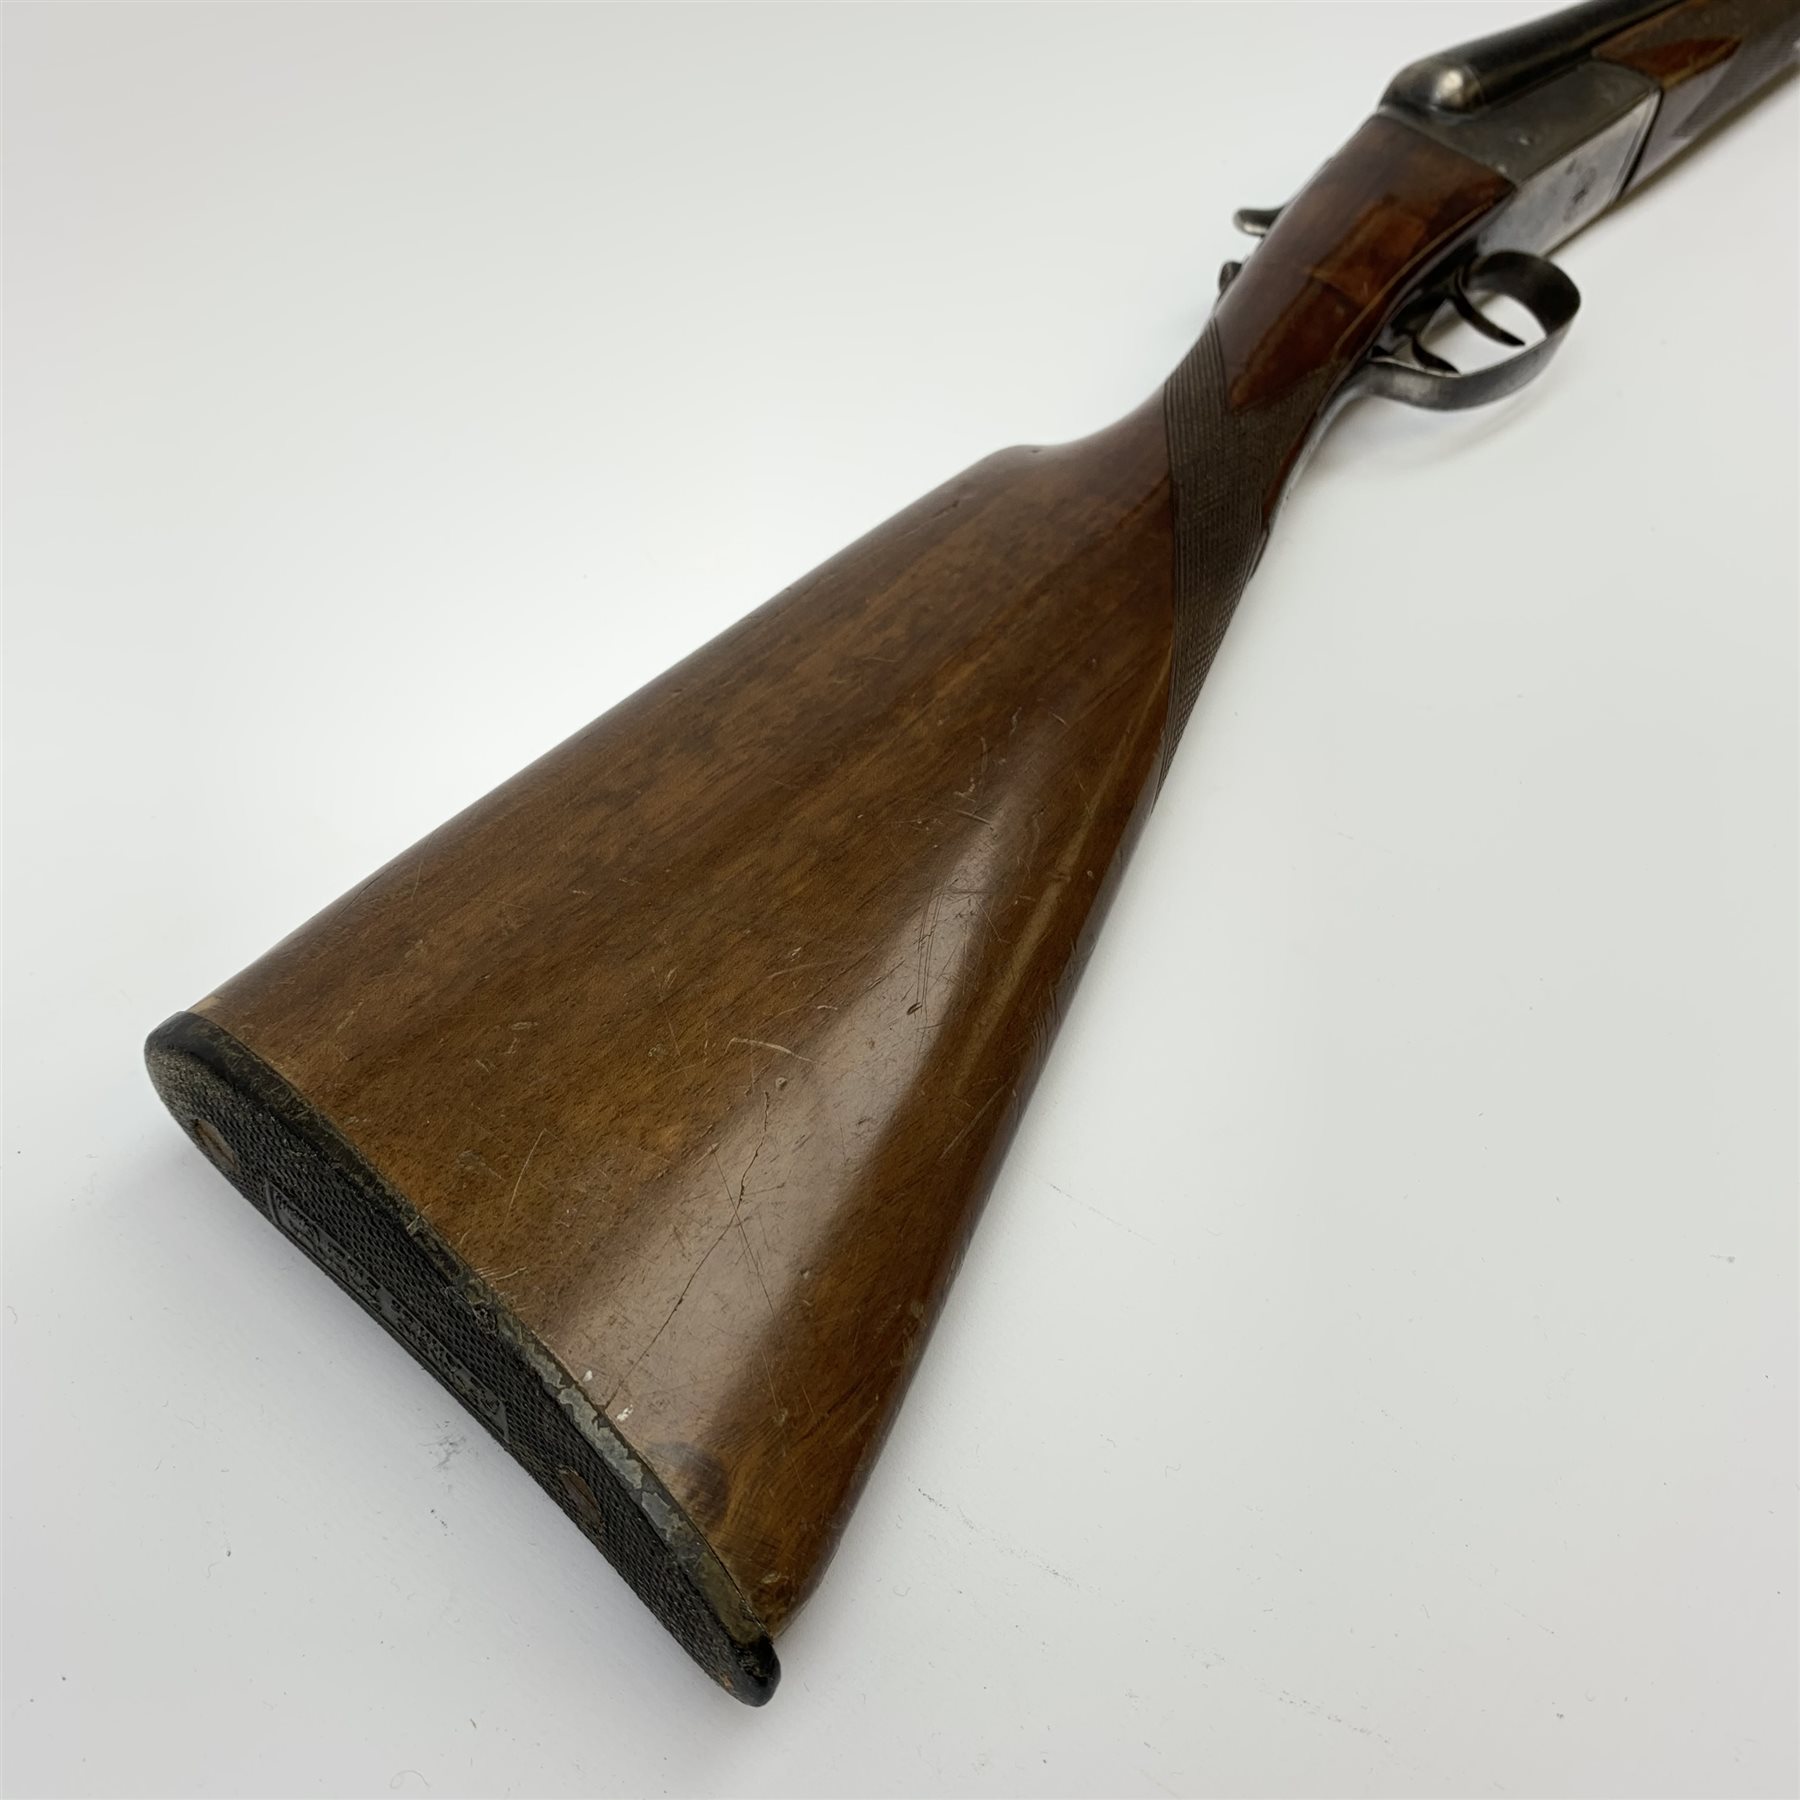 Spanish Zabala 12-bore box lock non-ejector side-by-side double barrel shotgun with walnut stock and - Image 4 of 5